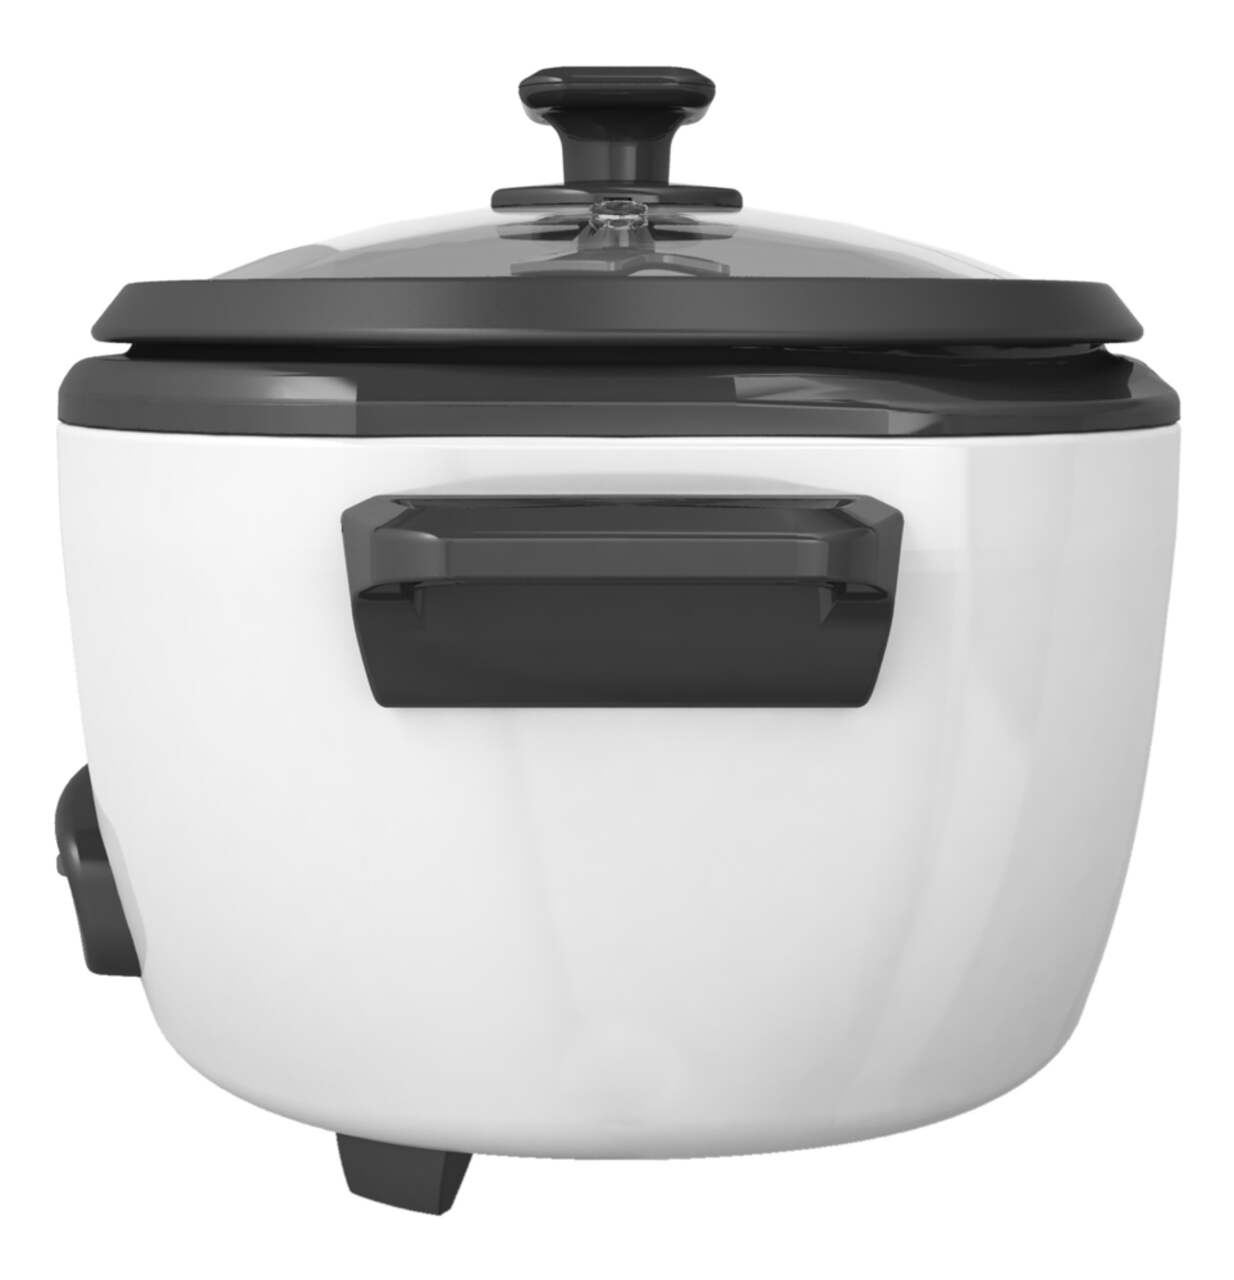 https://media-www.canadiantire.ca/product/living/kitchen/kitchen-appliances/0431373/black-decker-16-cup-rice-cooker-3e63a86f-855d-4bd0-9af2-9029c610e1dd.png?imdensity=1&imwidth=1244&impolicy=mZoom